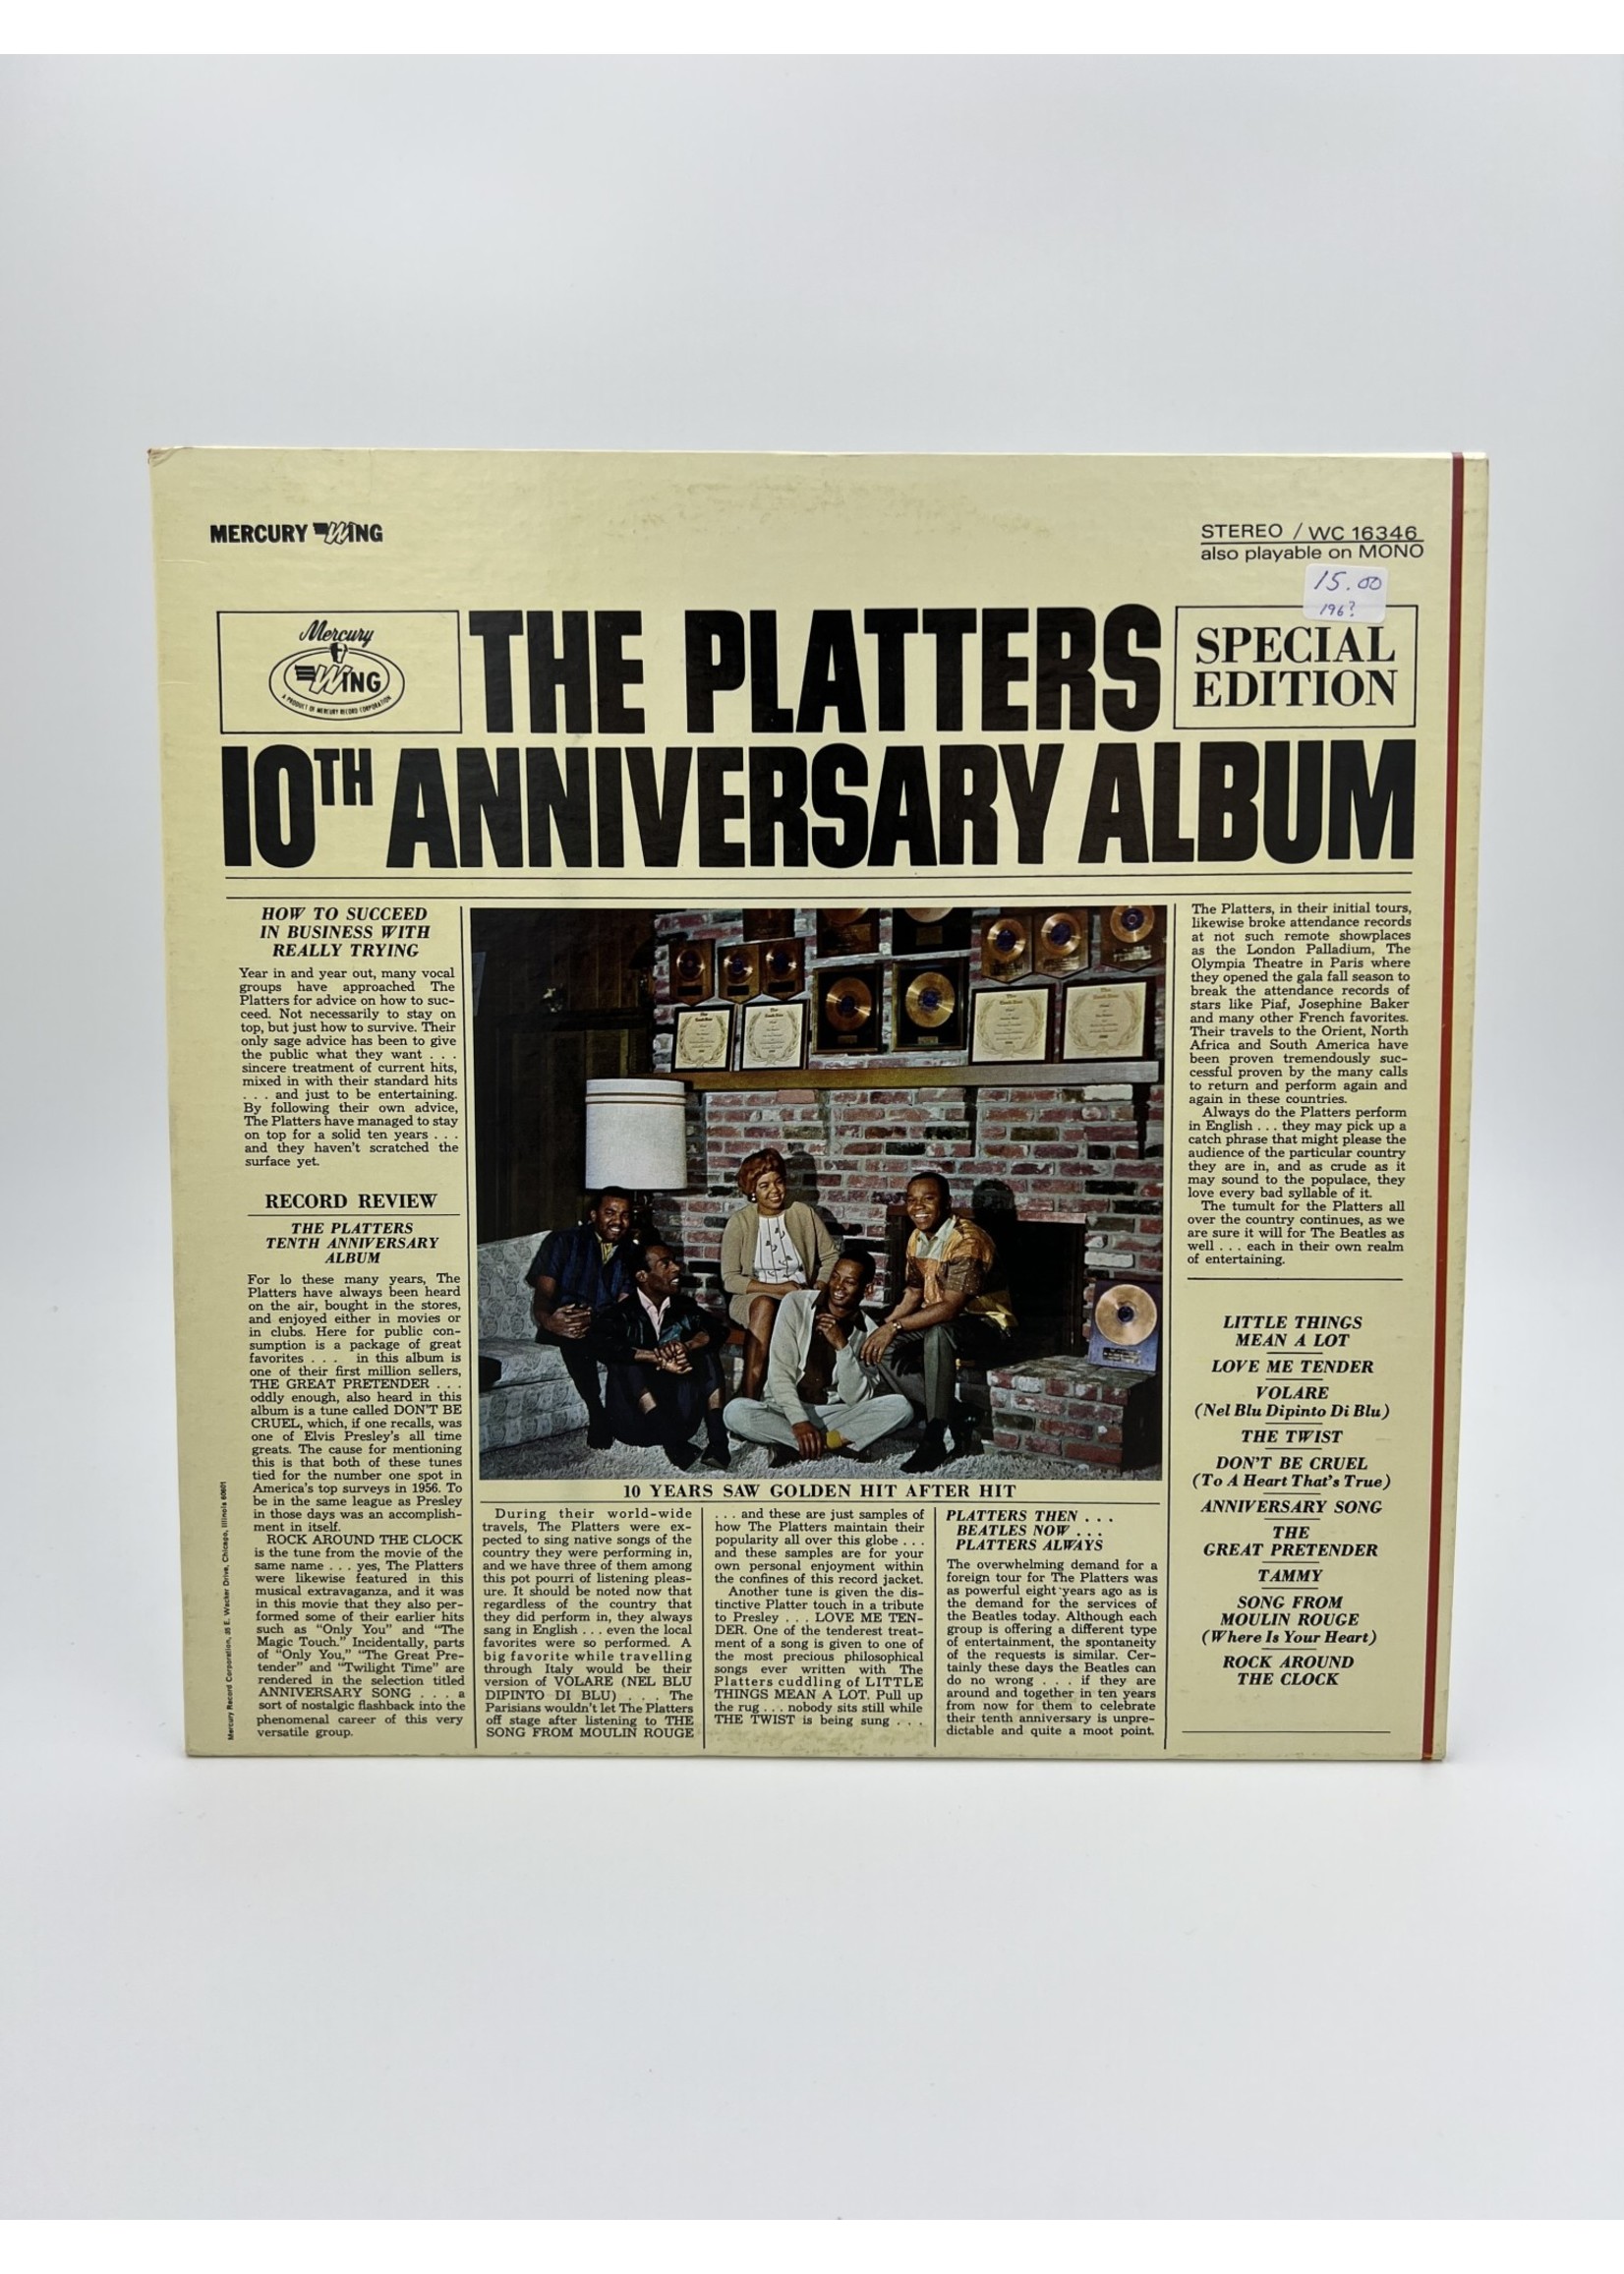 LP The Platters Special Edition 10th Anniversary Album LP RECORD